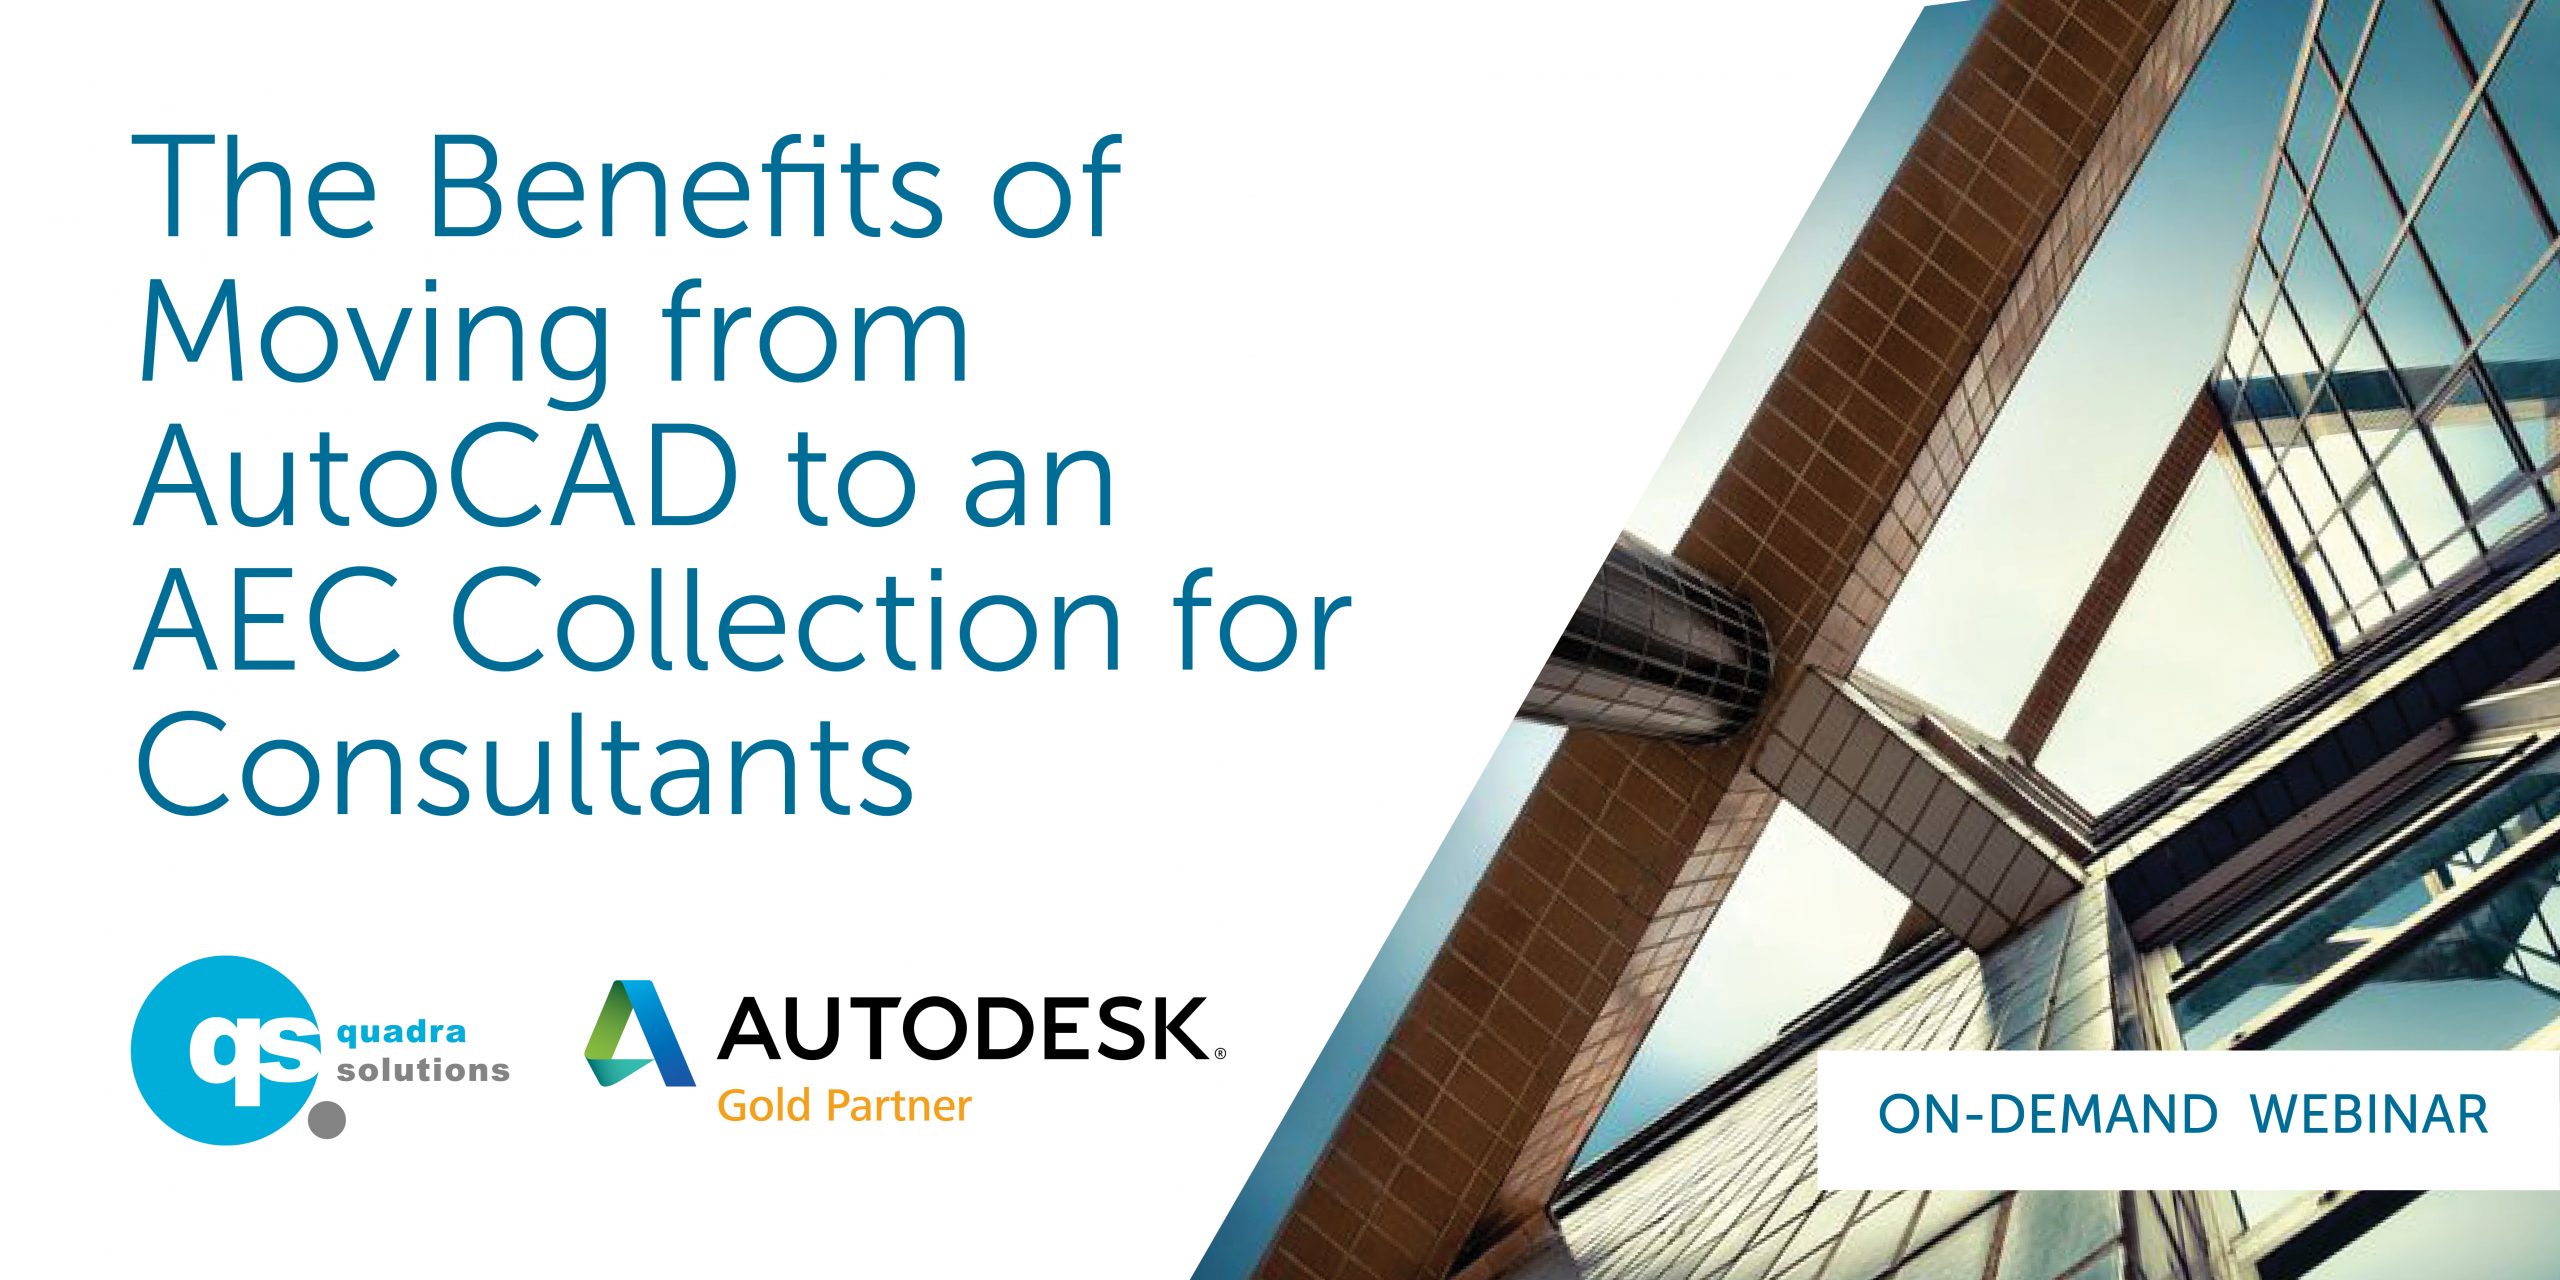 The benefits of moving from AutoCAD to an AEC Collection for Consultants